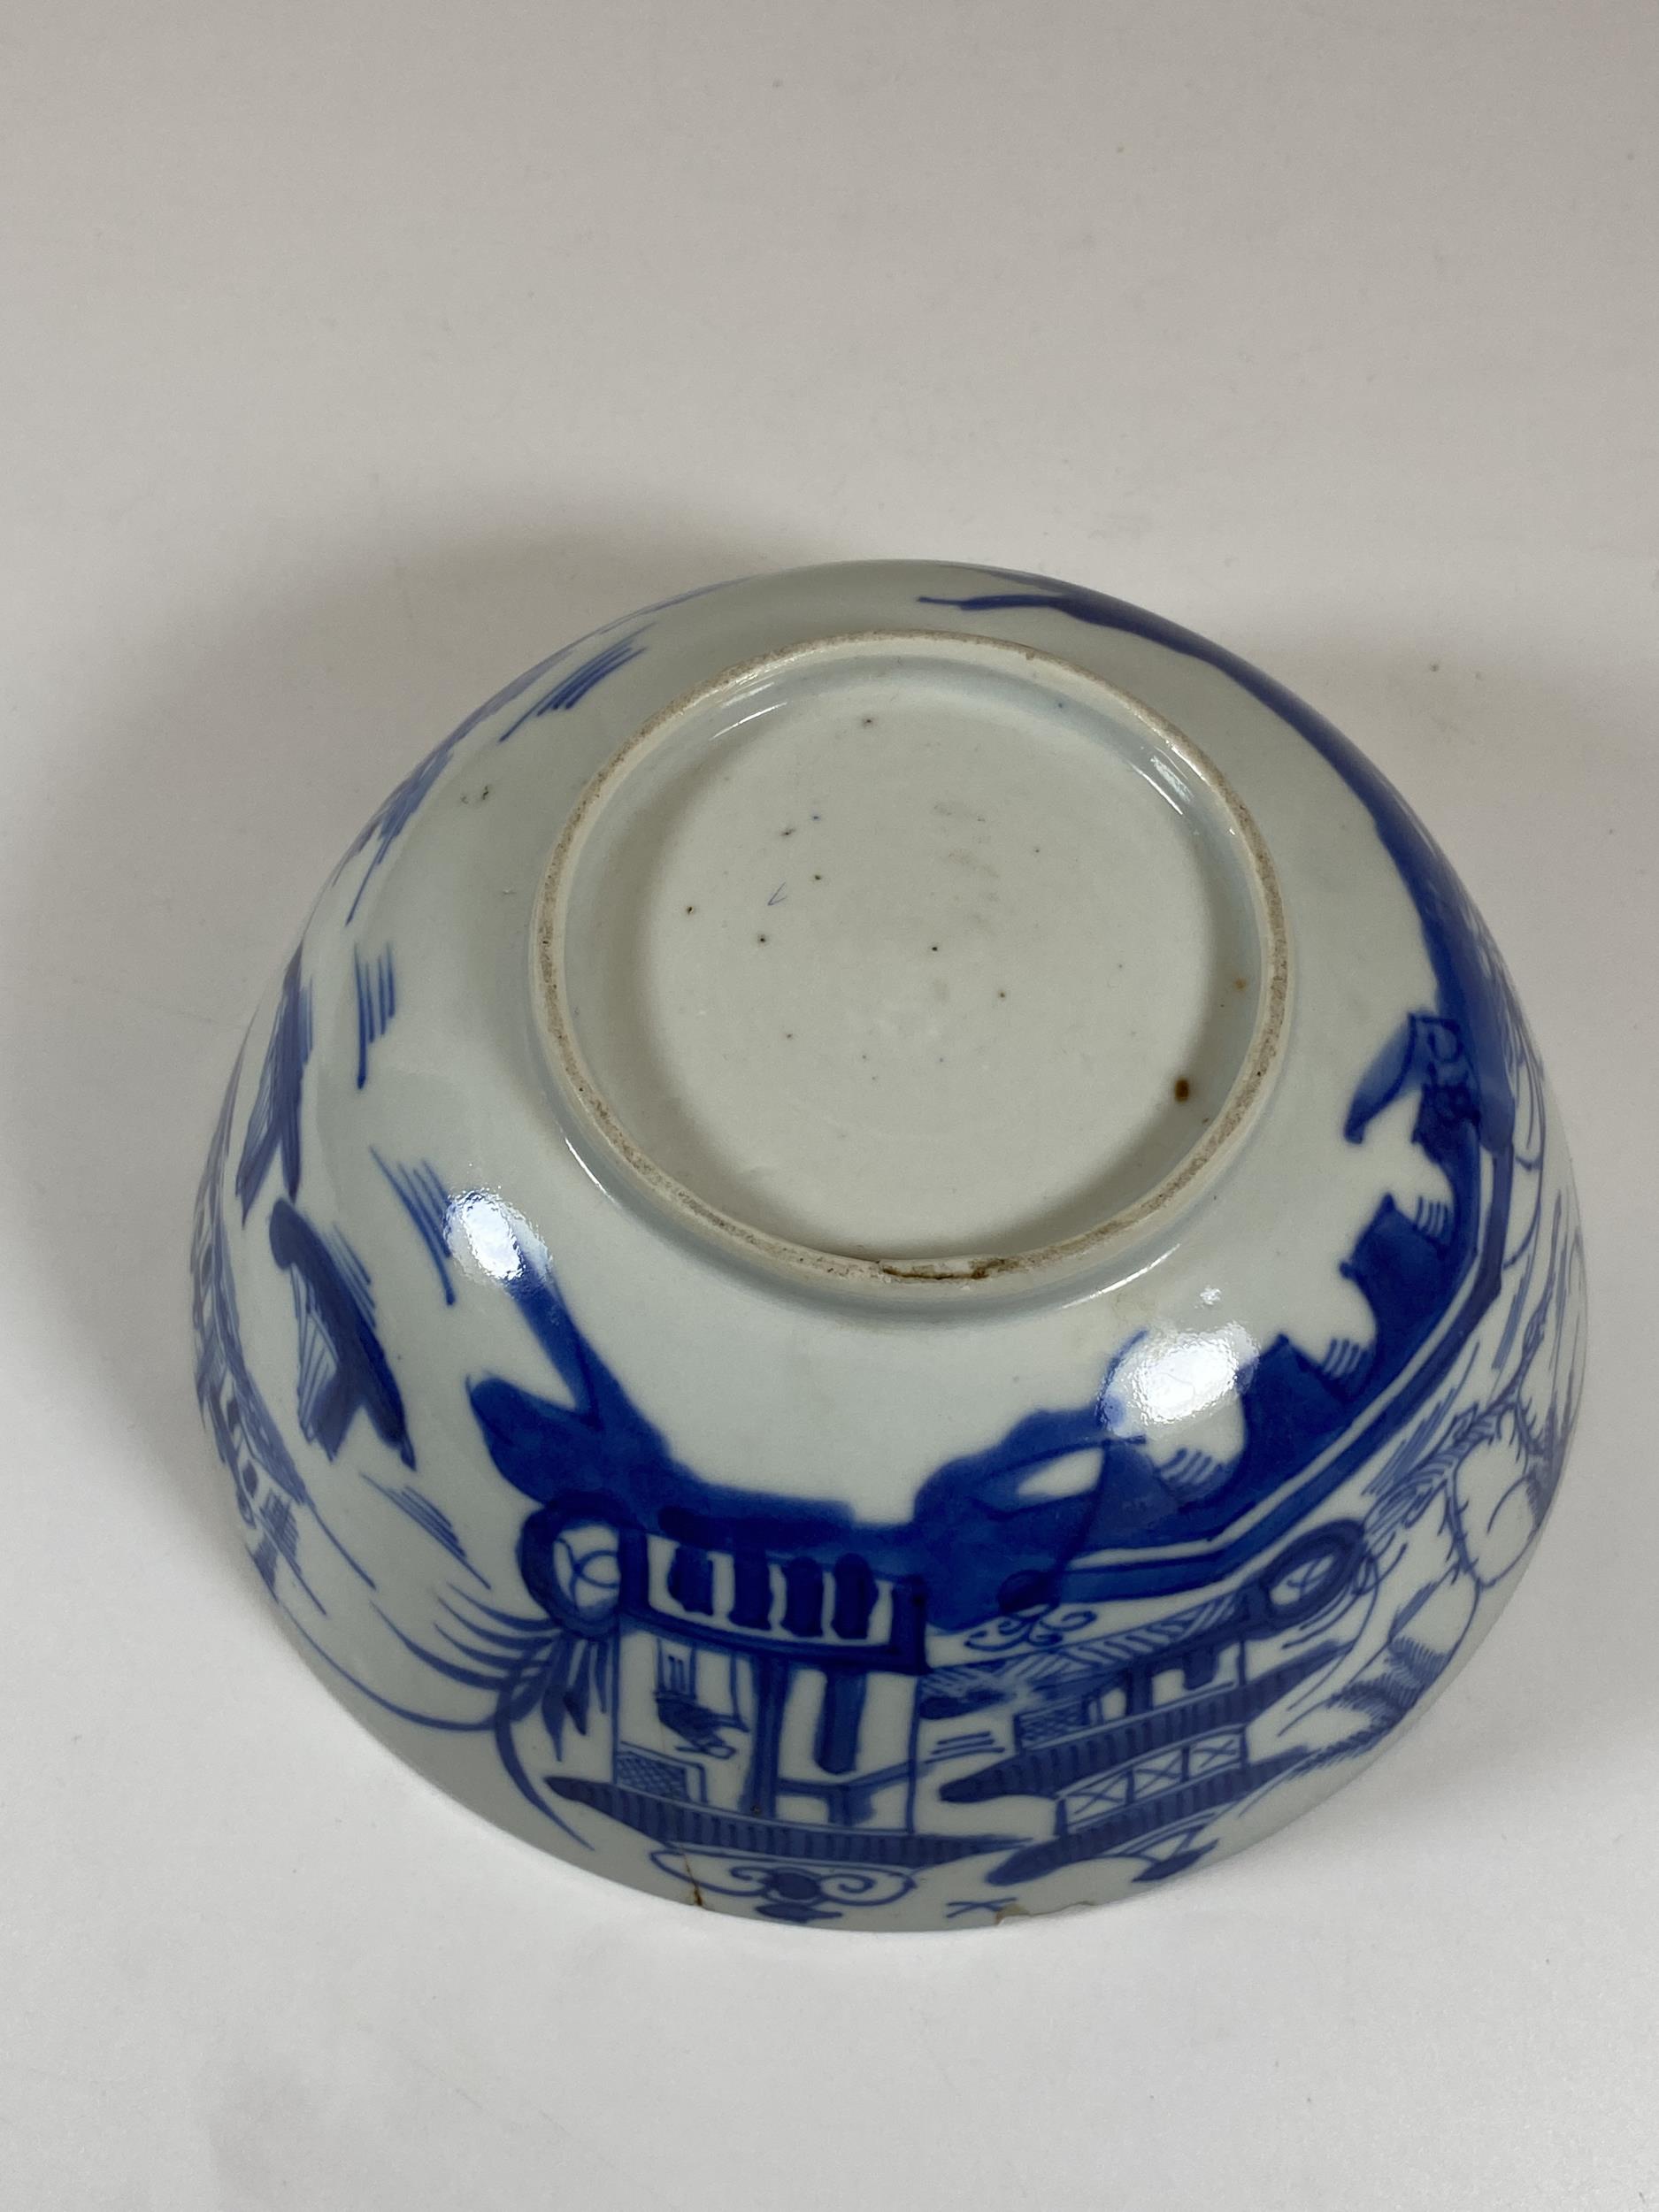 A 19TH CENTURY CHINESE BLUE AND WHITE PORCELAIN BOWL WITH PAGODA DESIGN, DIAMETER 17CM - Image 4 of 6